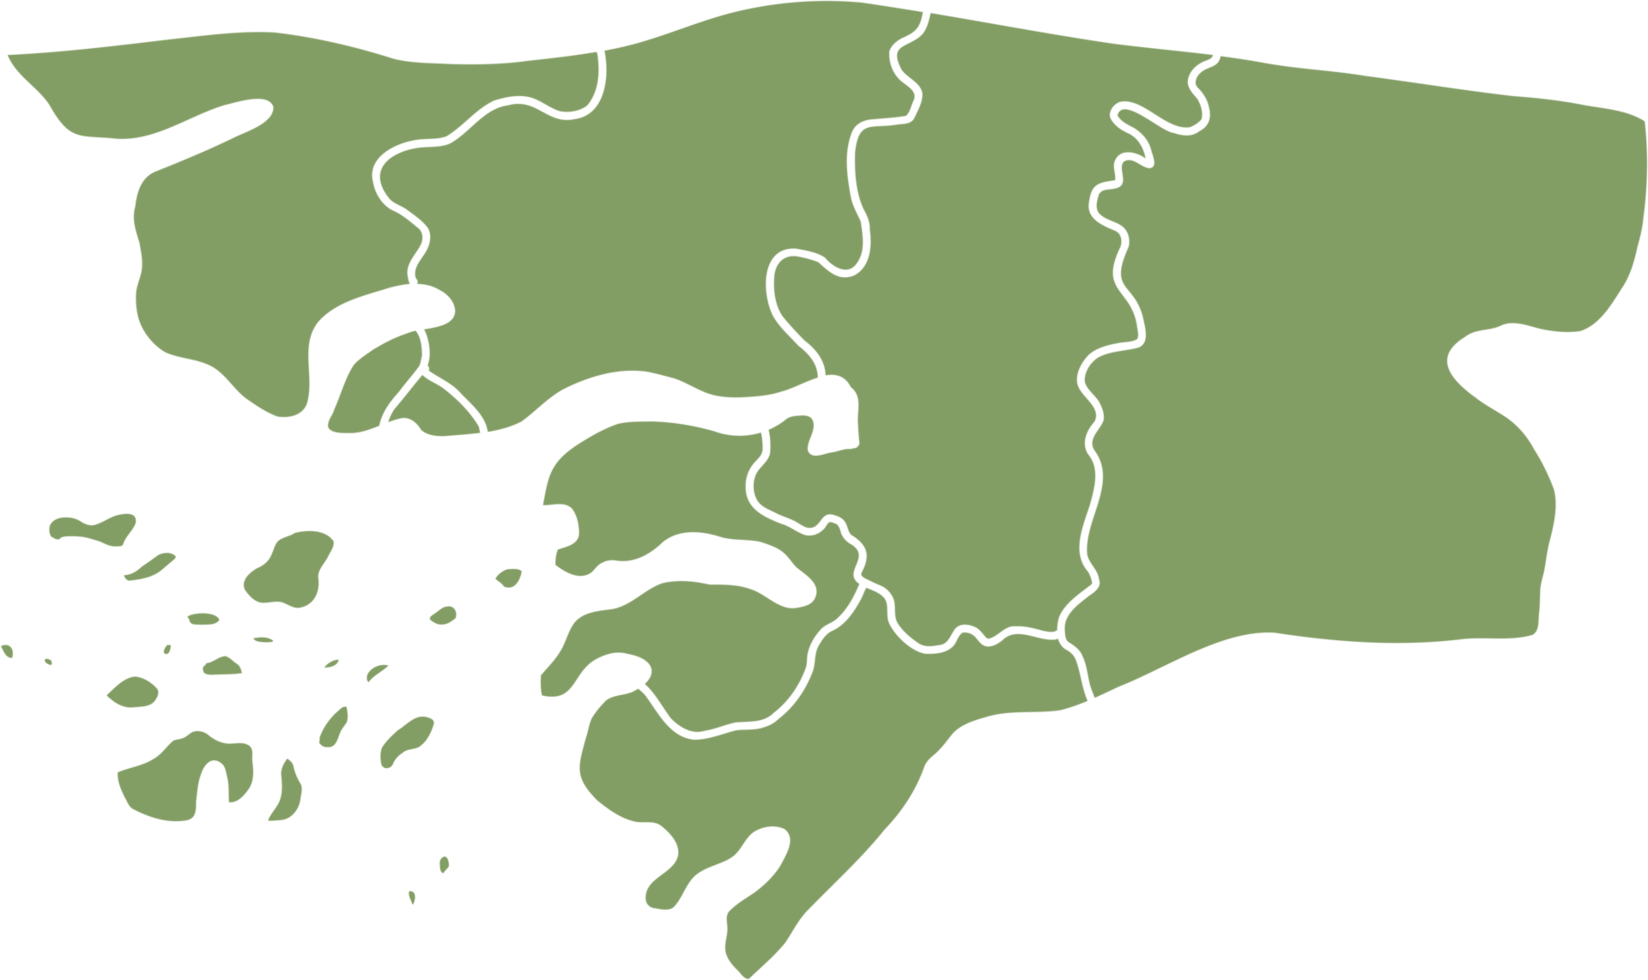 doodle freehand drawing of guinea-bissau map. png